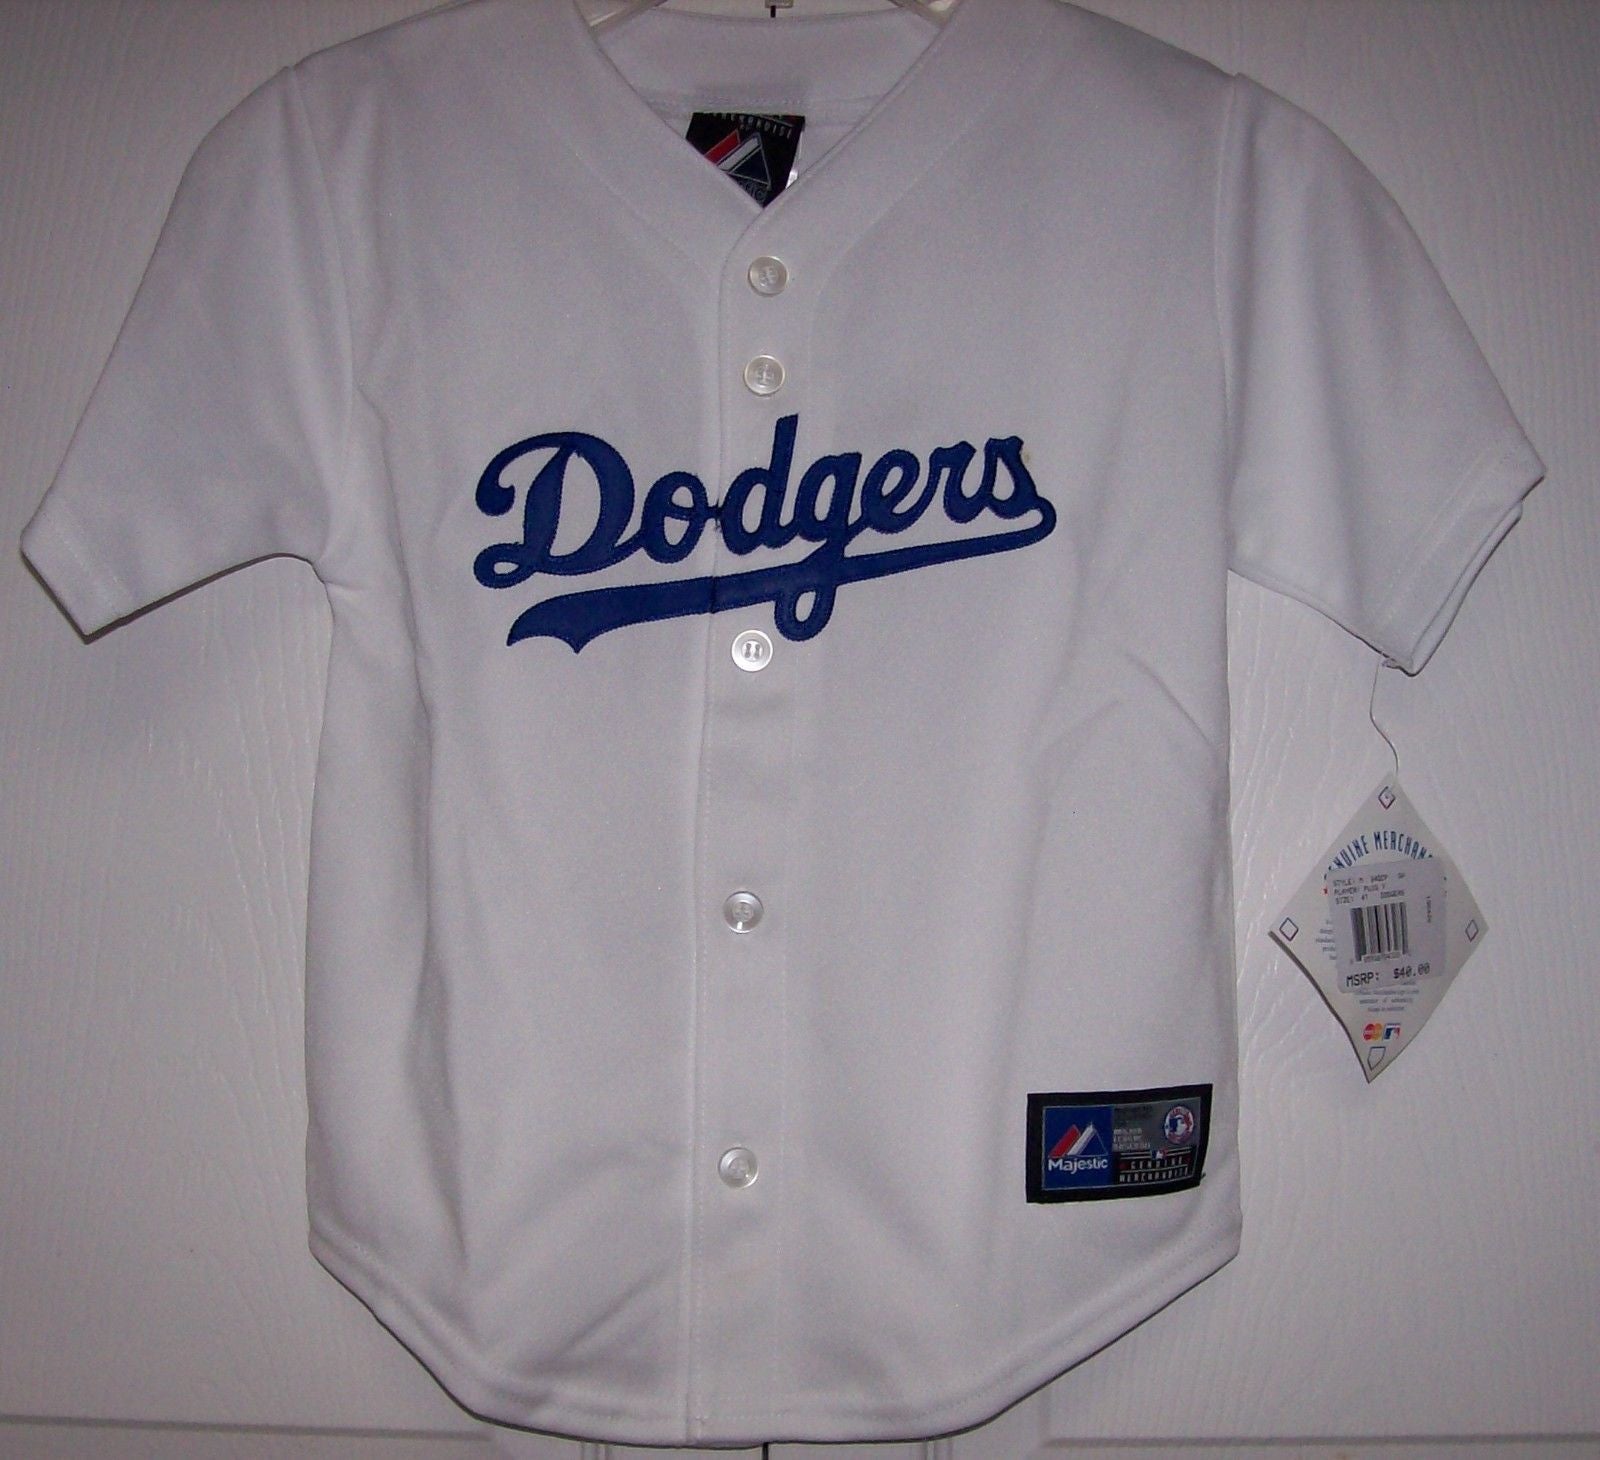 Vintage Majestic MLB Los Angeles Dodgers Jersey Size Youth L.